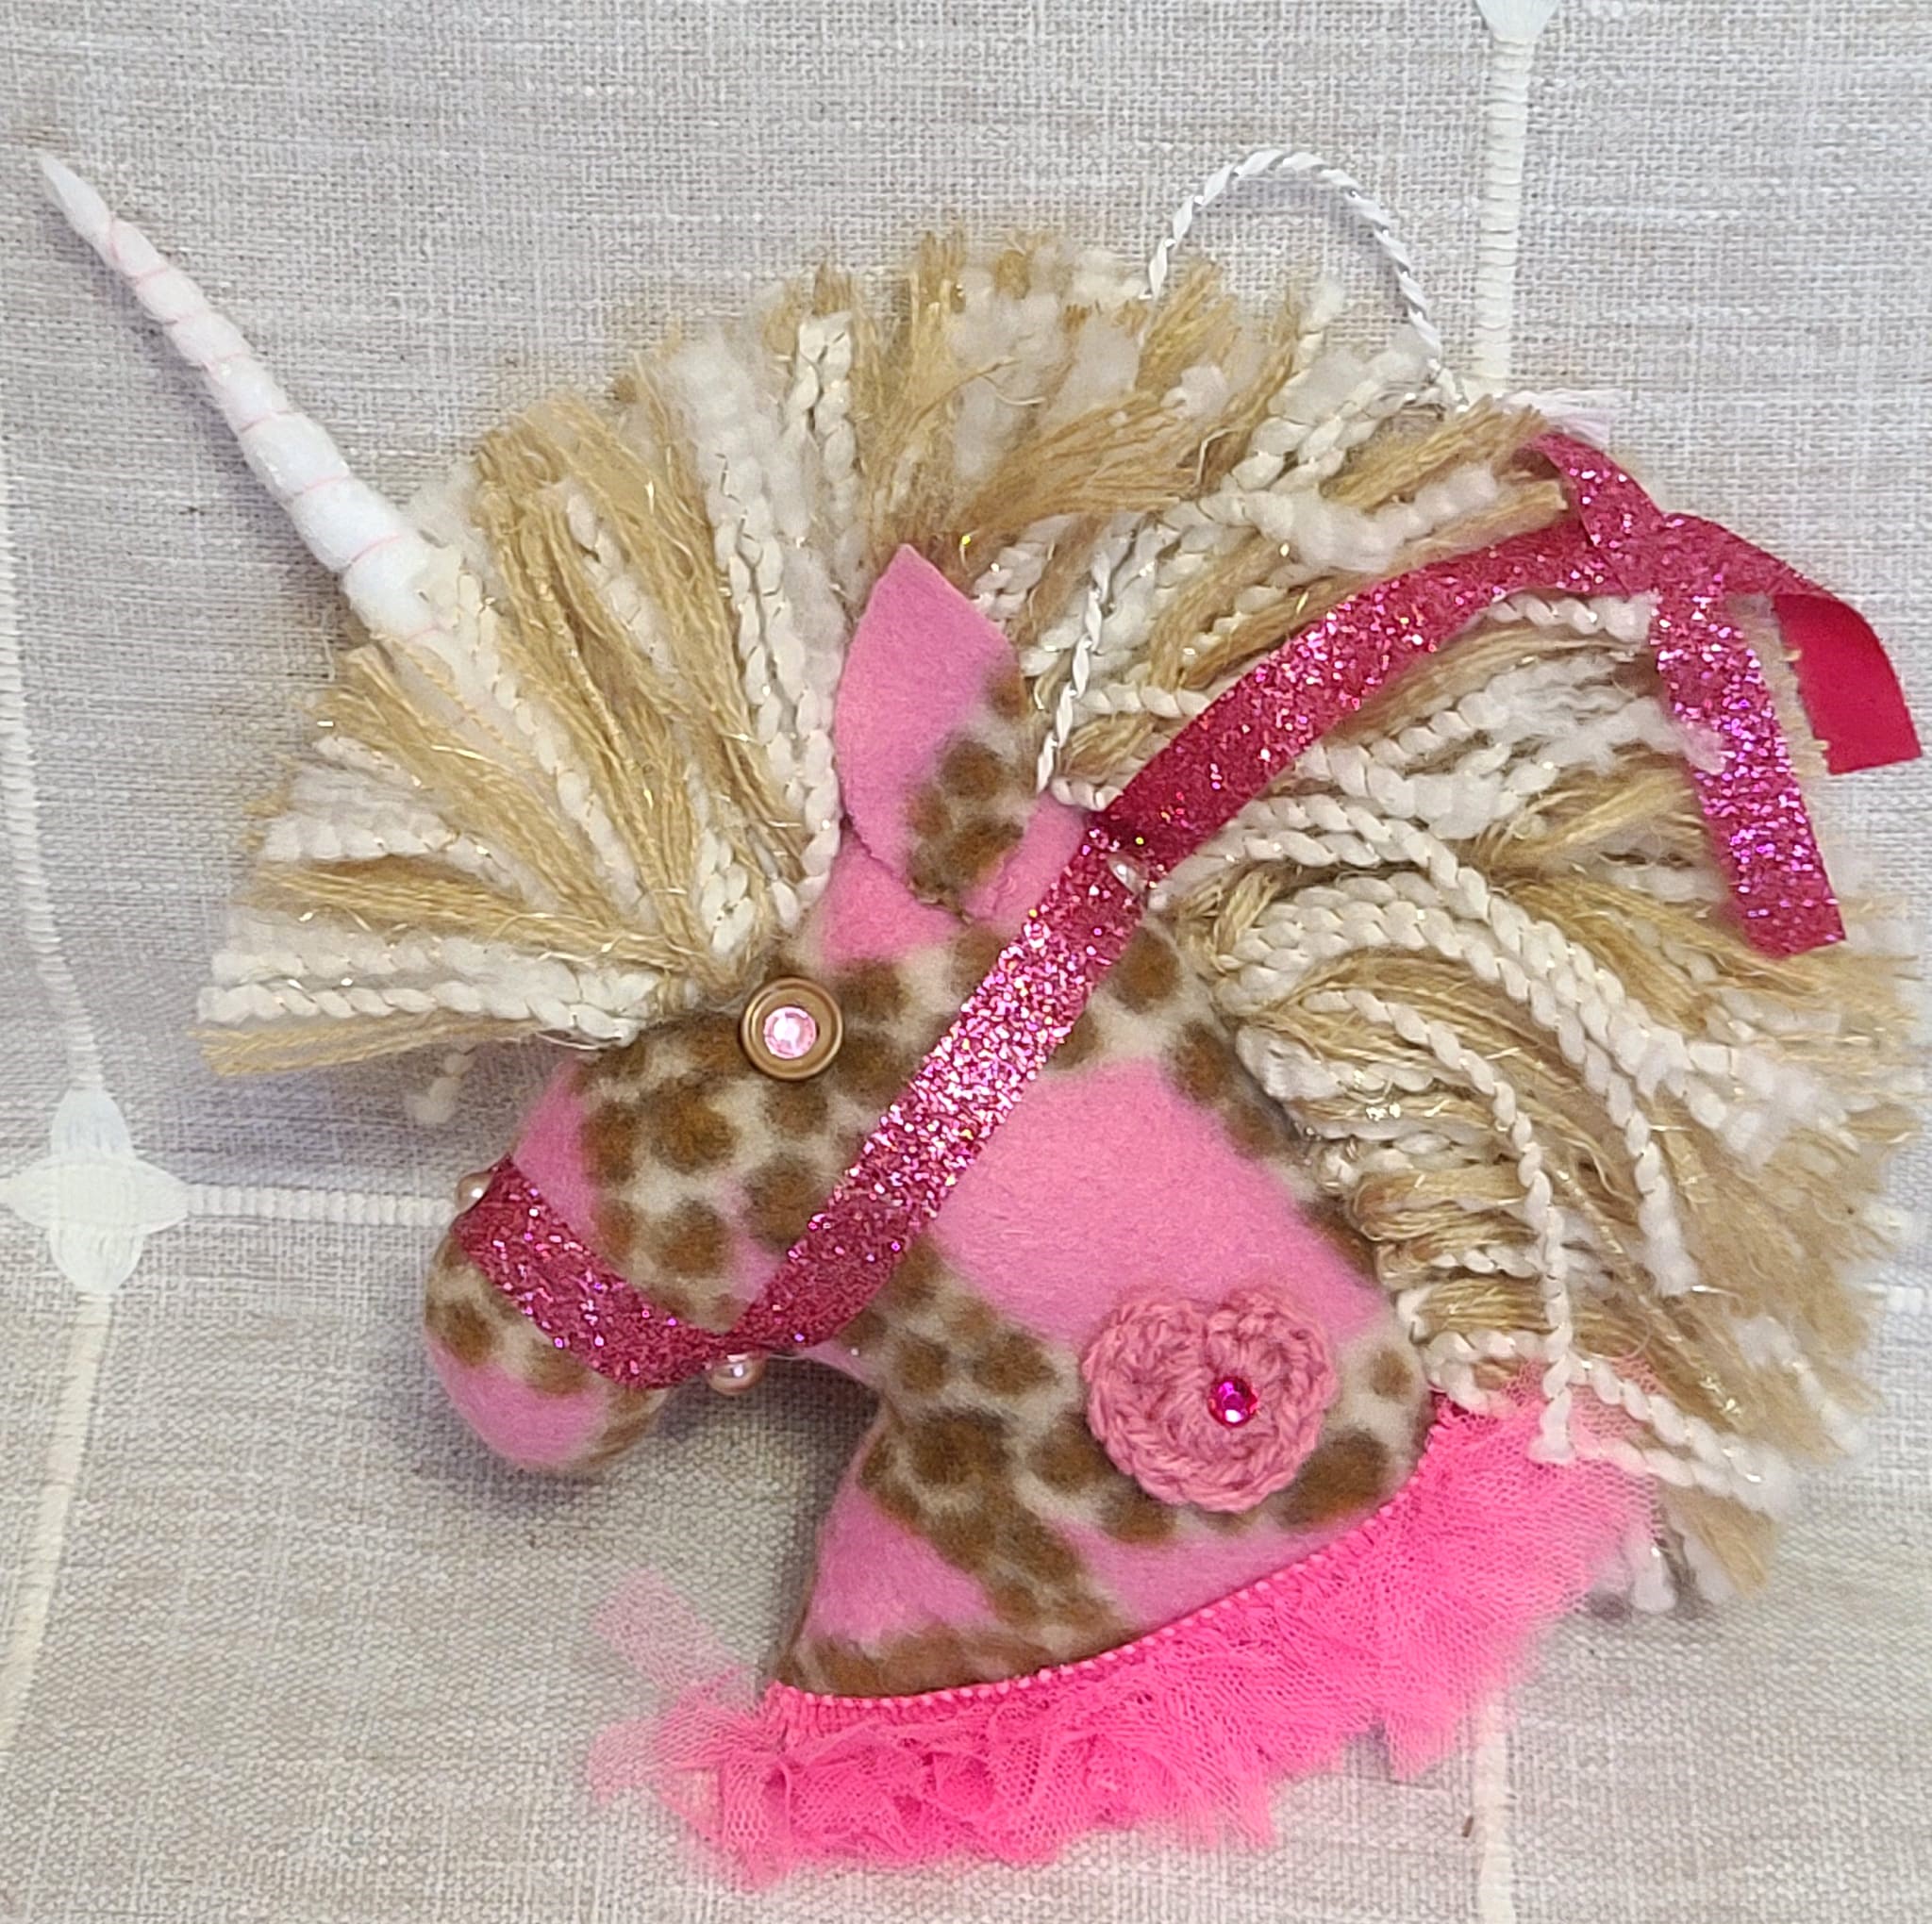 Unicorn felt ornament with brown spots and pink trim